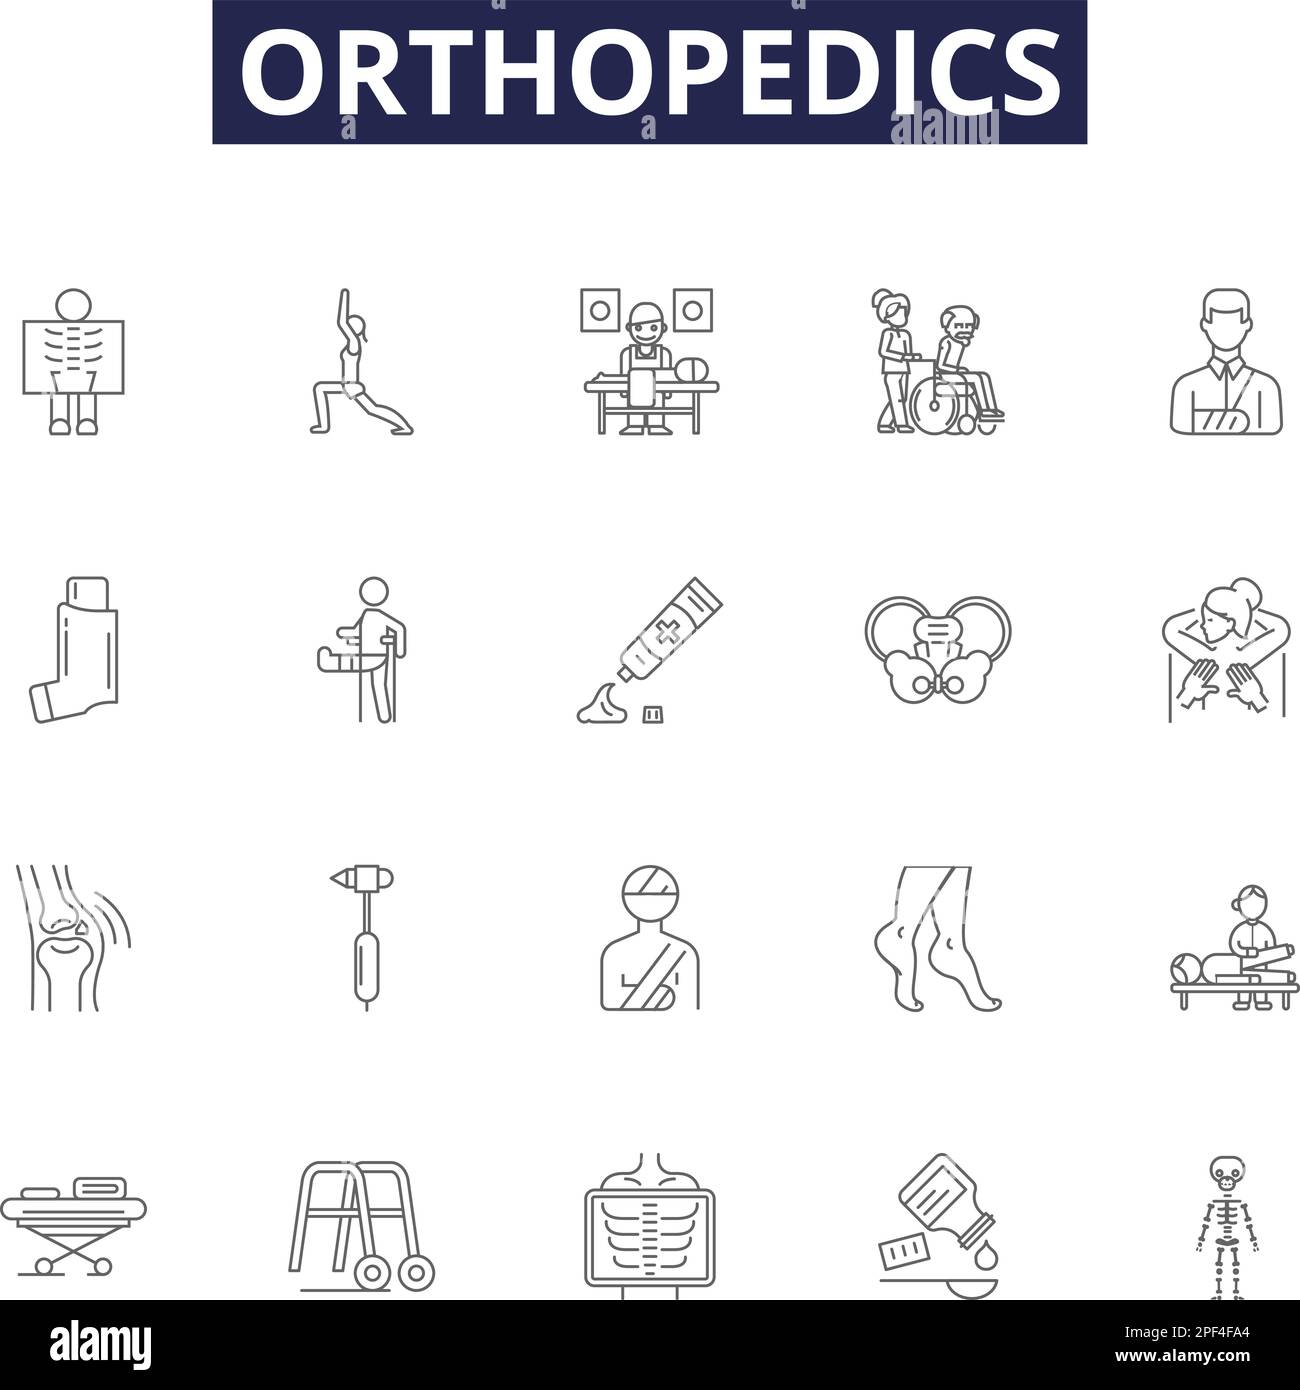 Orthopedics line vector icons and signs. Bones, Joints, Muscles, Tendons, Ligaments, Surgery, Physiotherapy, Imaging outline vector illustration set Stock Vector